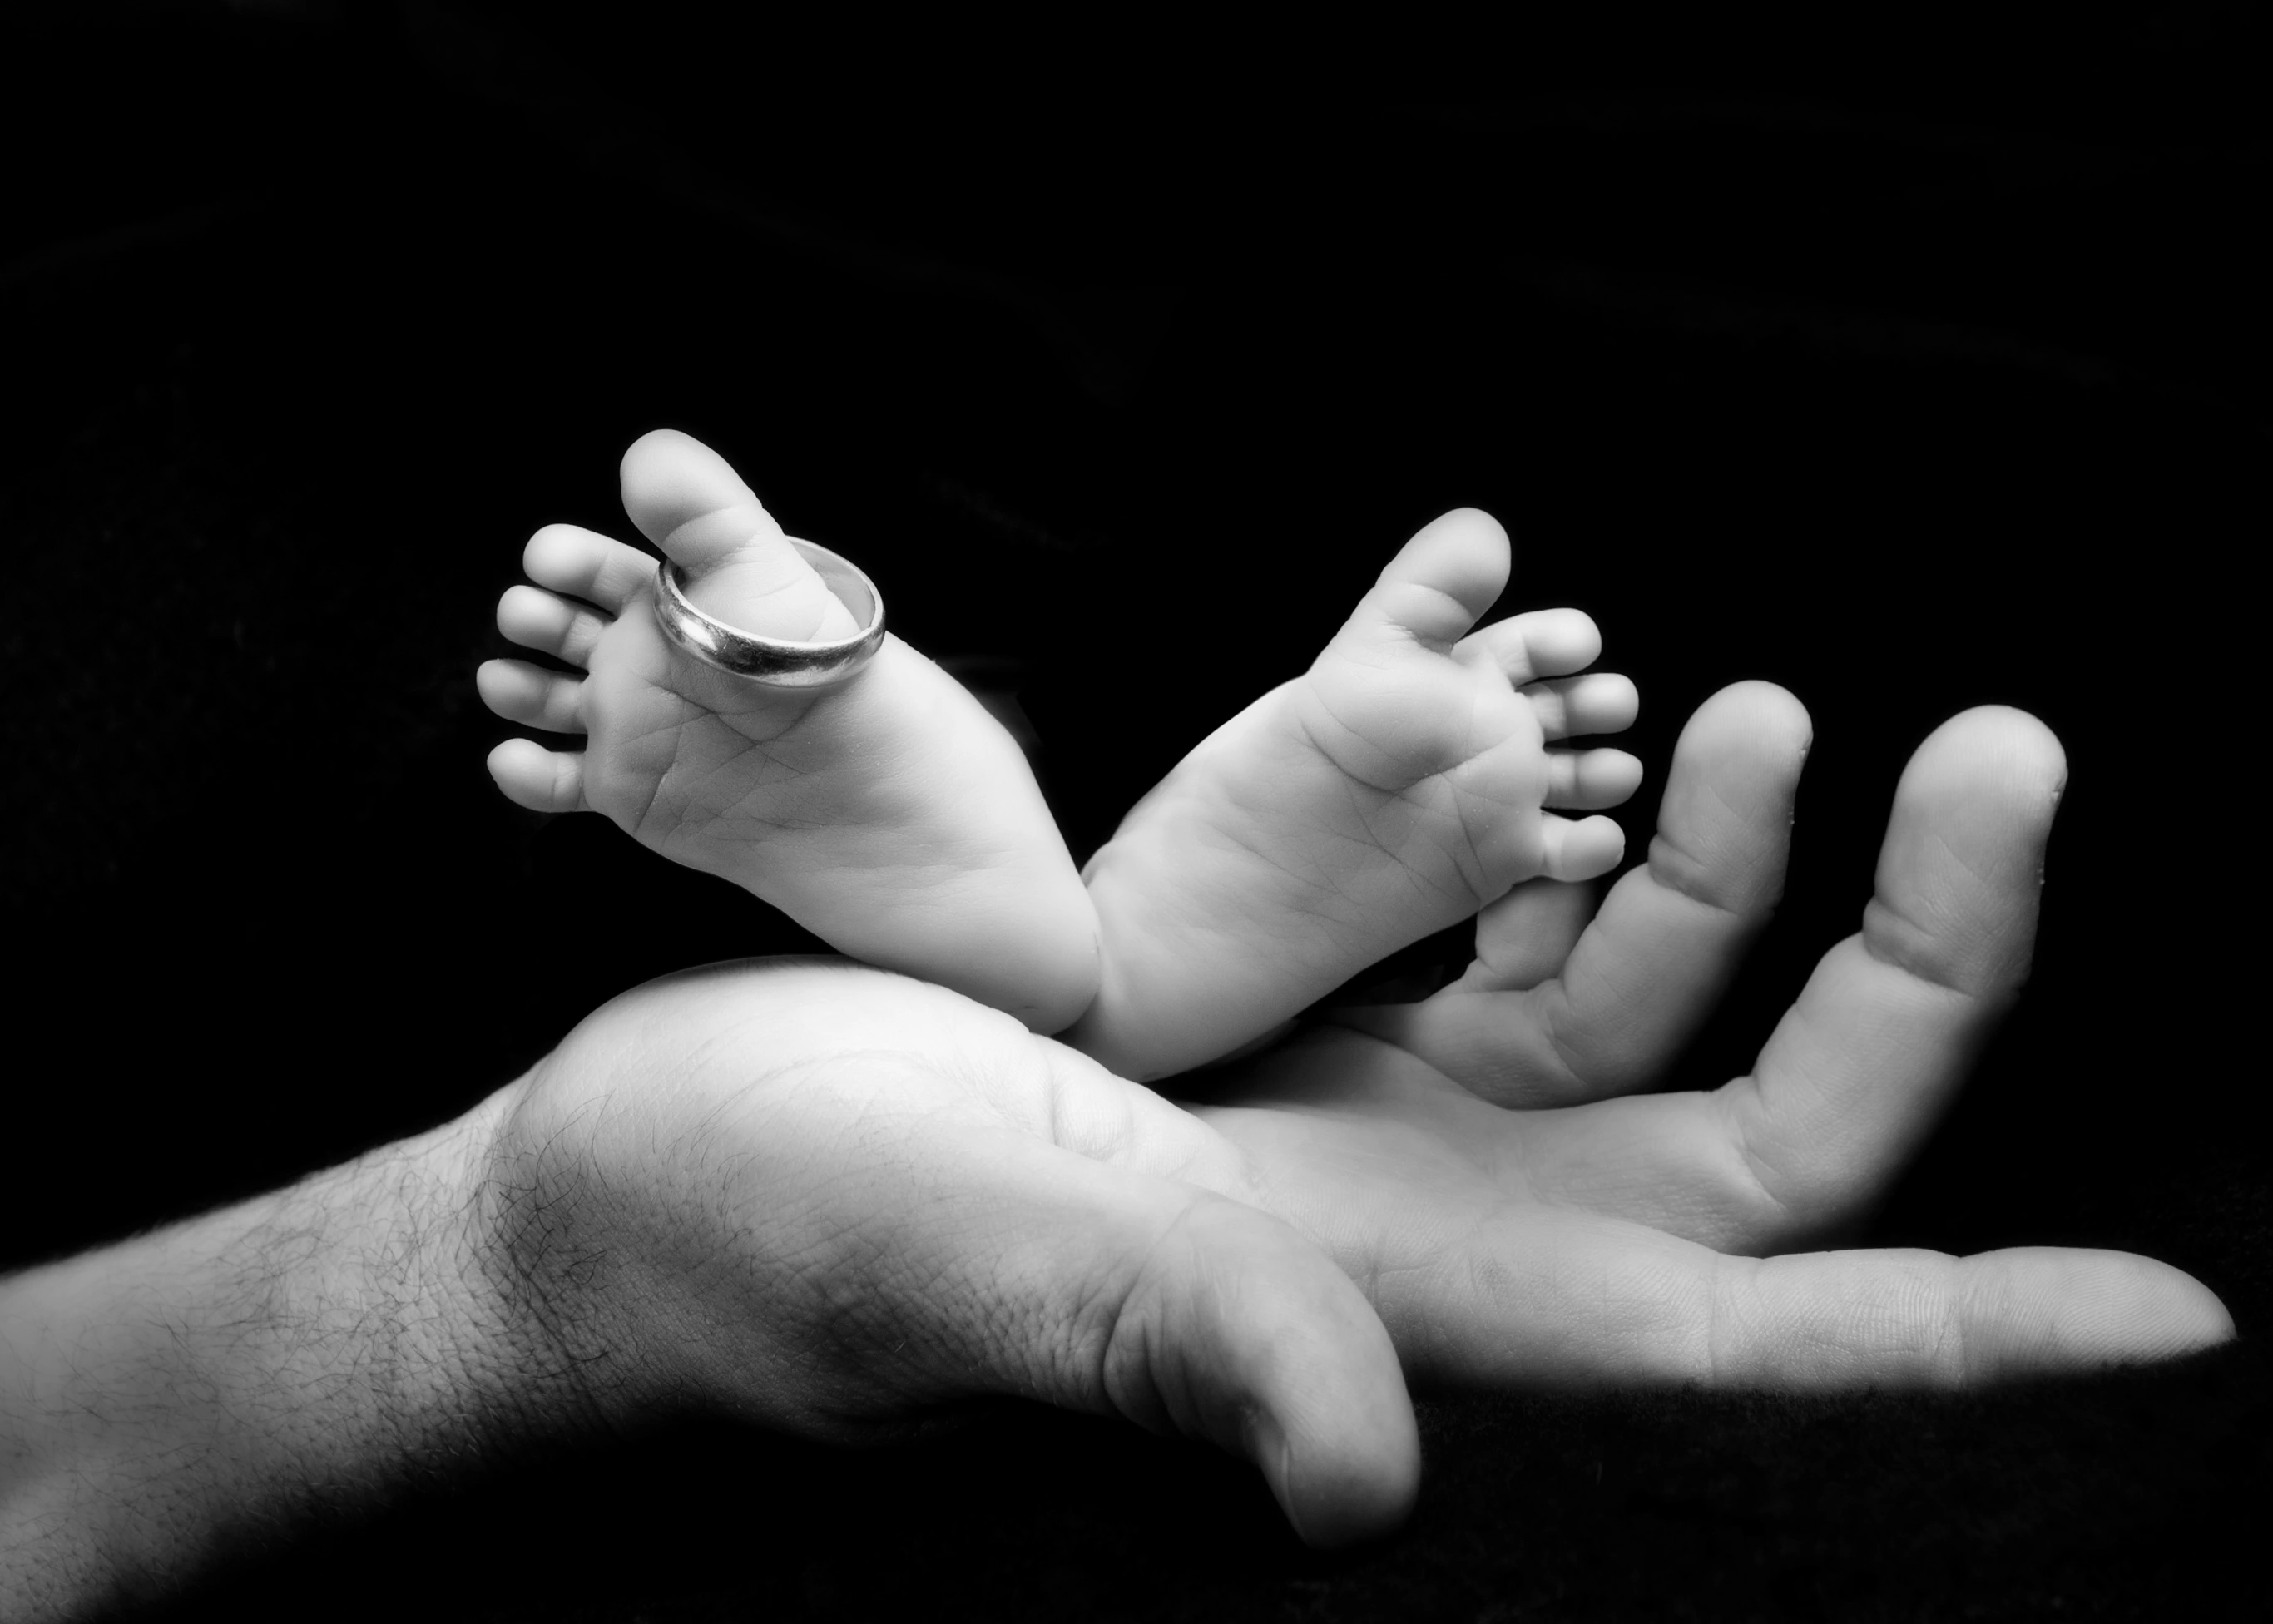 newborn baby pictures in black and white fine art prints available at maternity portrait photography studio in maine.